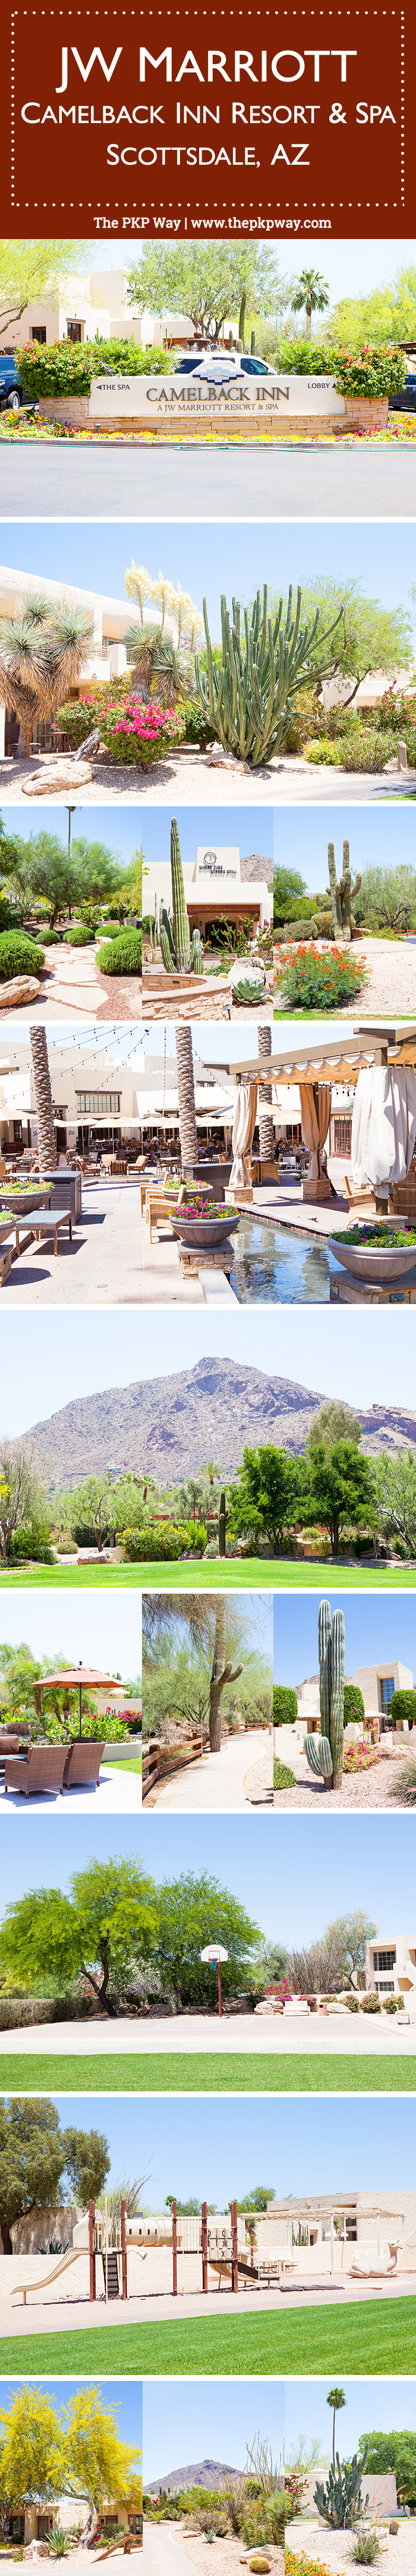 For our second wedding anniversary, we went to Scottsdale, Arizona and stayed at the amazing JW Marriott Camelback Inn Resort & Spa. Join me as I give a tour of the property, share our experiences with the resort, help you decide where to eat, and tell you all about how we got around!